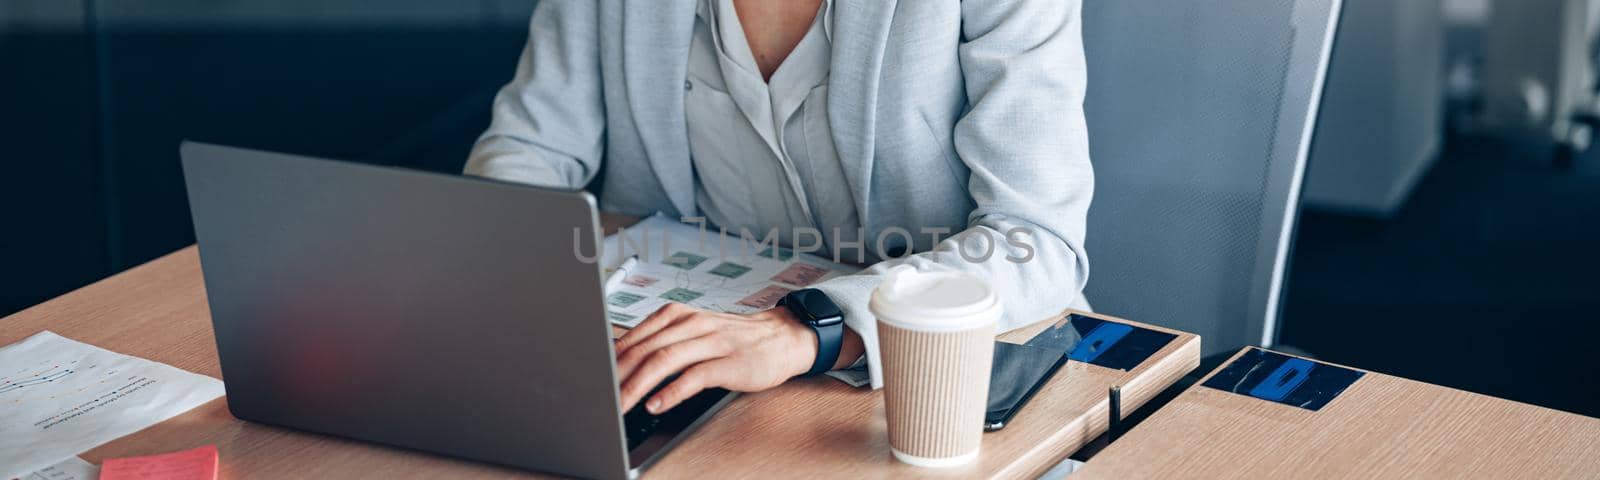 Portrait of smiling businesswoman working on laptop at her workplace at office. Blurred background.